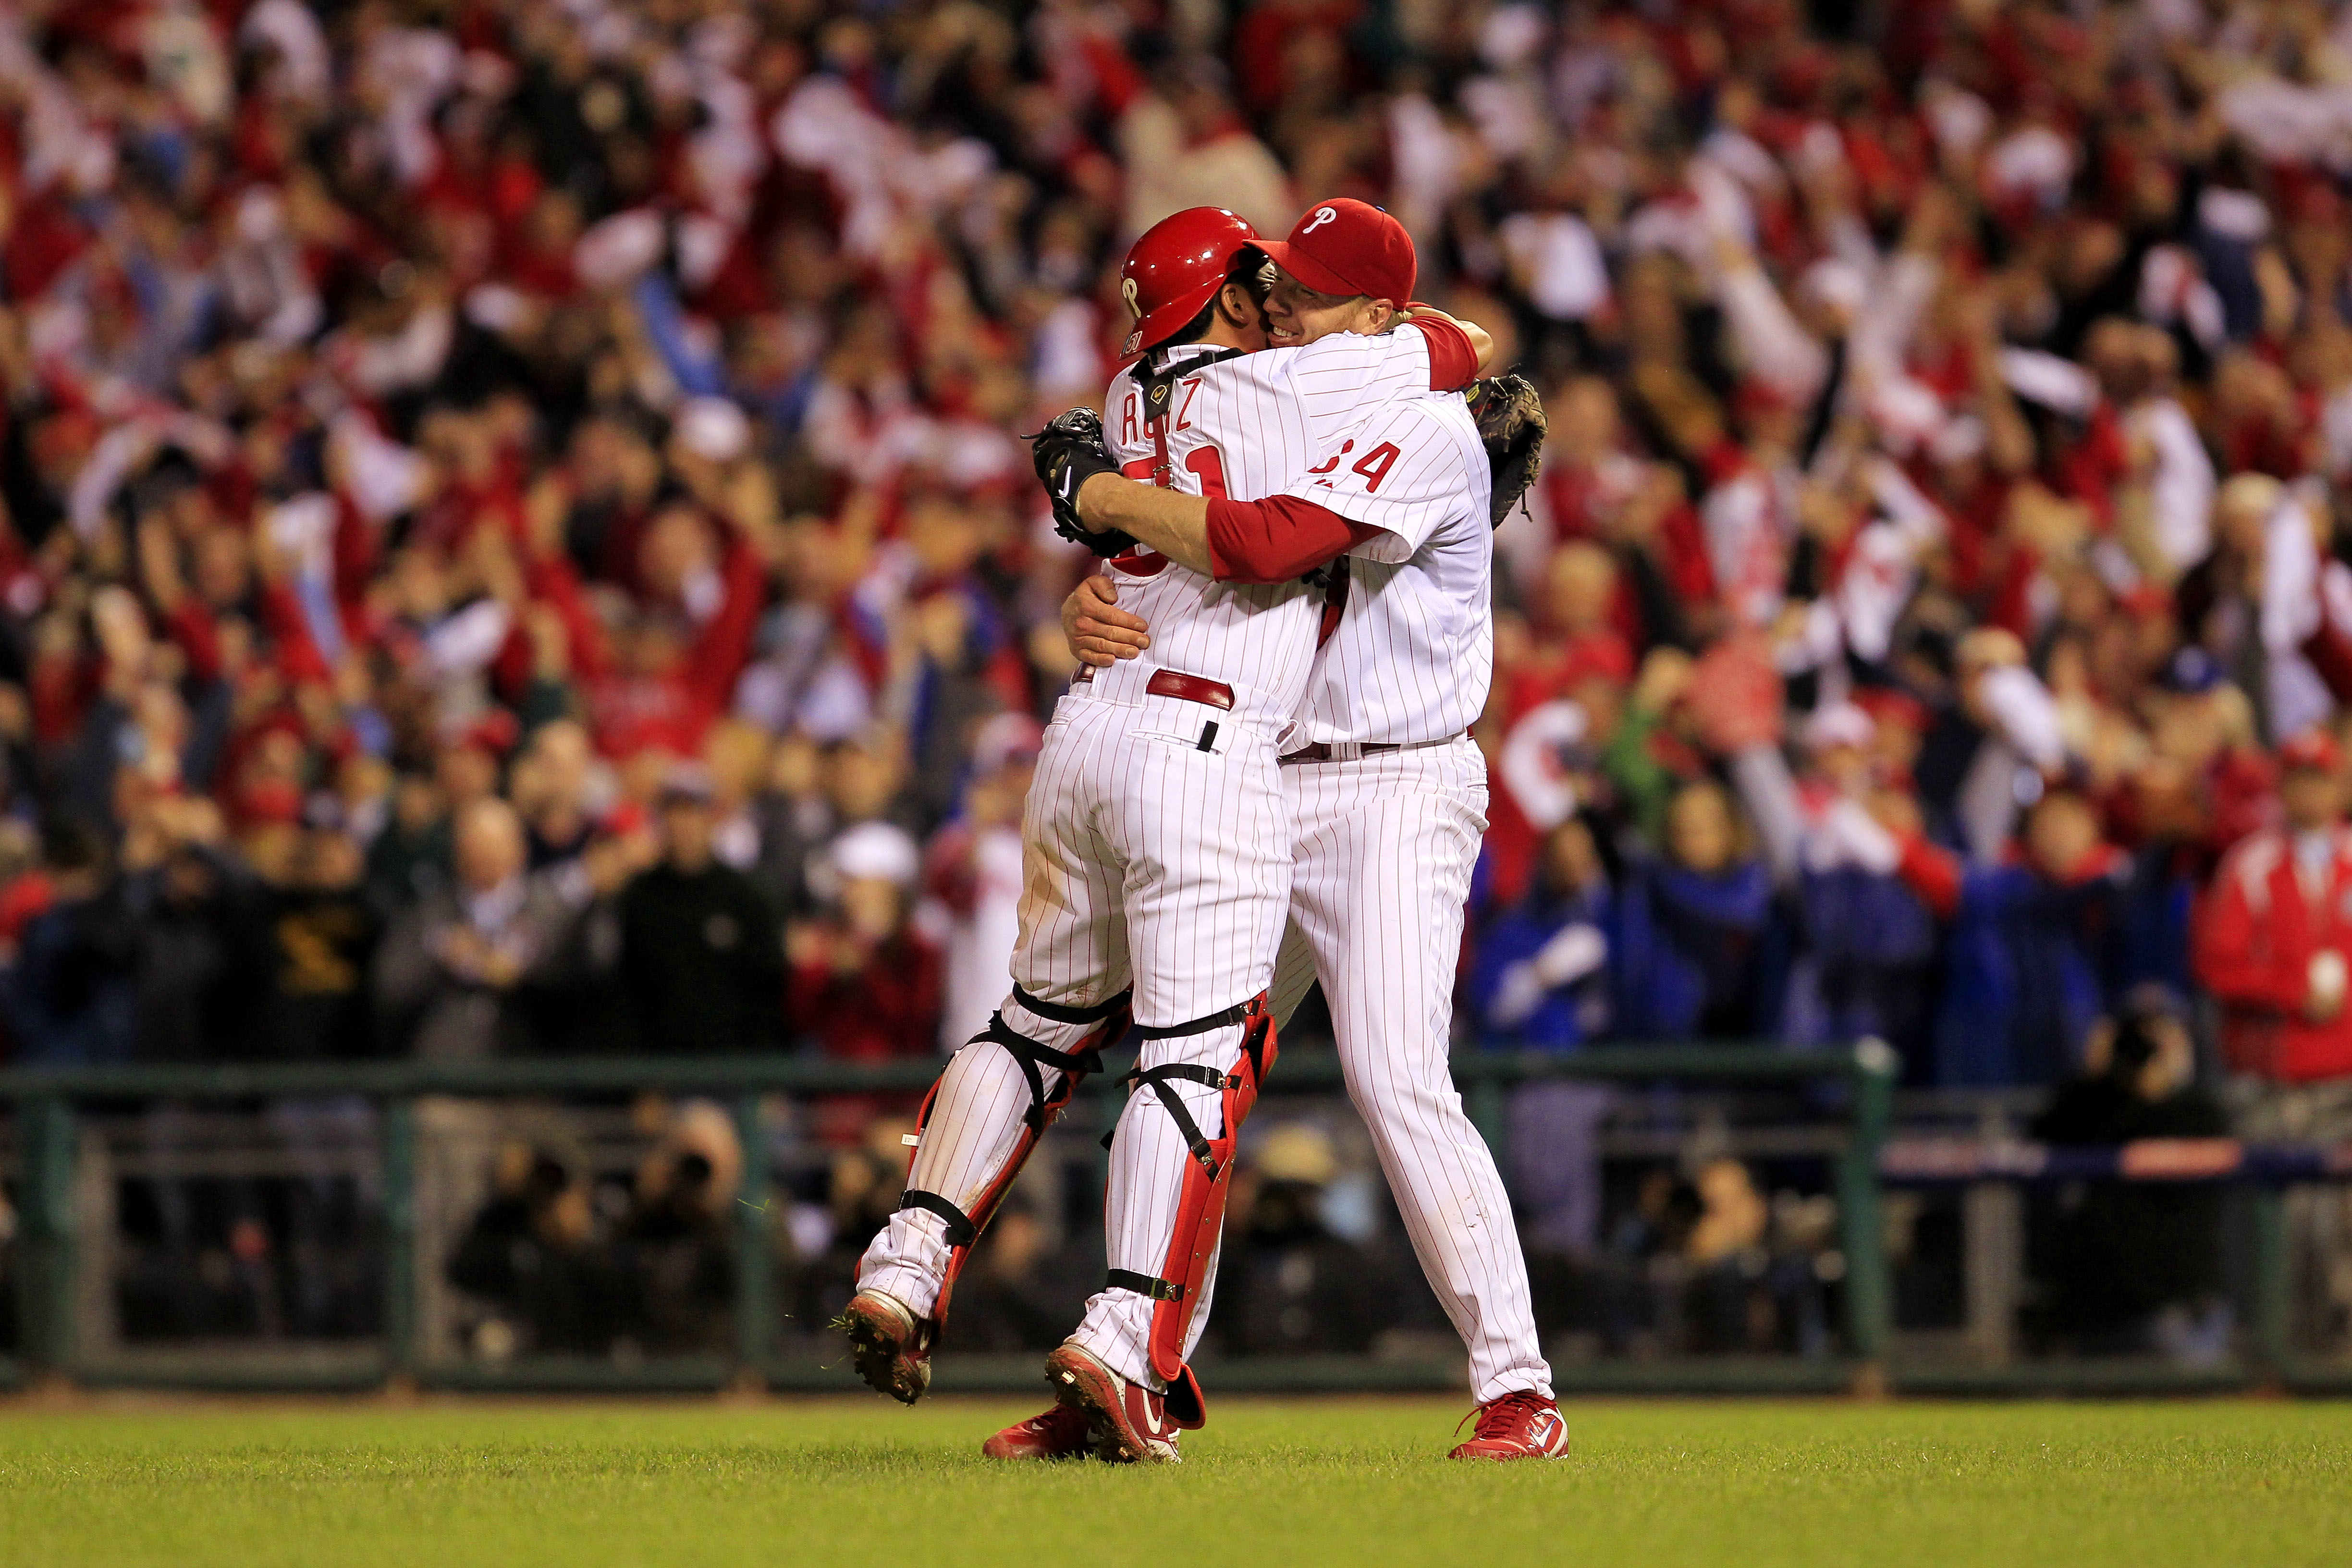 PHILADELPHIA - OCTOBER 06:  Roy Halladay #34 and Carlos Ruiz #51 of the Philadelphia Phillies celebrate Halladay's no-hitter and the win in Game 1 of the NLDS against the Cincinnati Reds at Citizens Bank Park on October 6, 2010 in Philadelphia, Pennsylvan